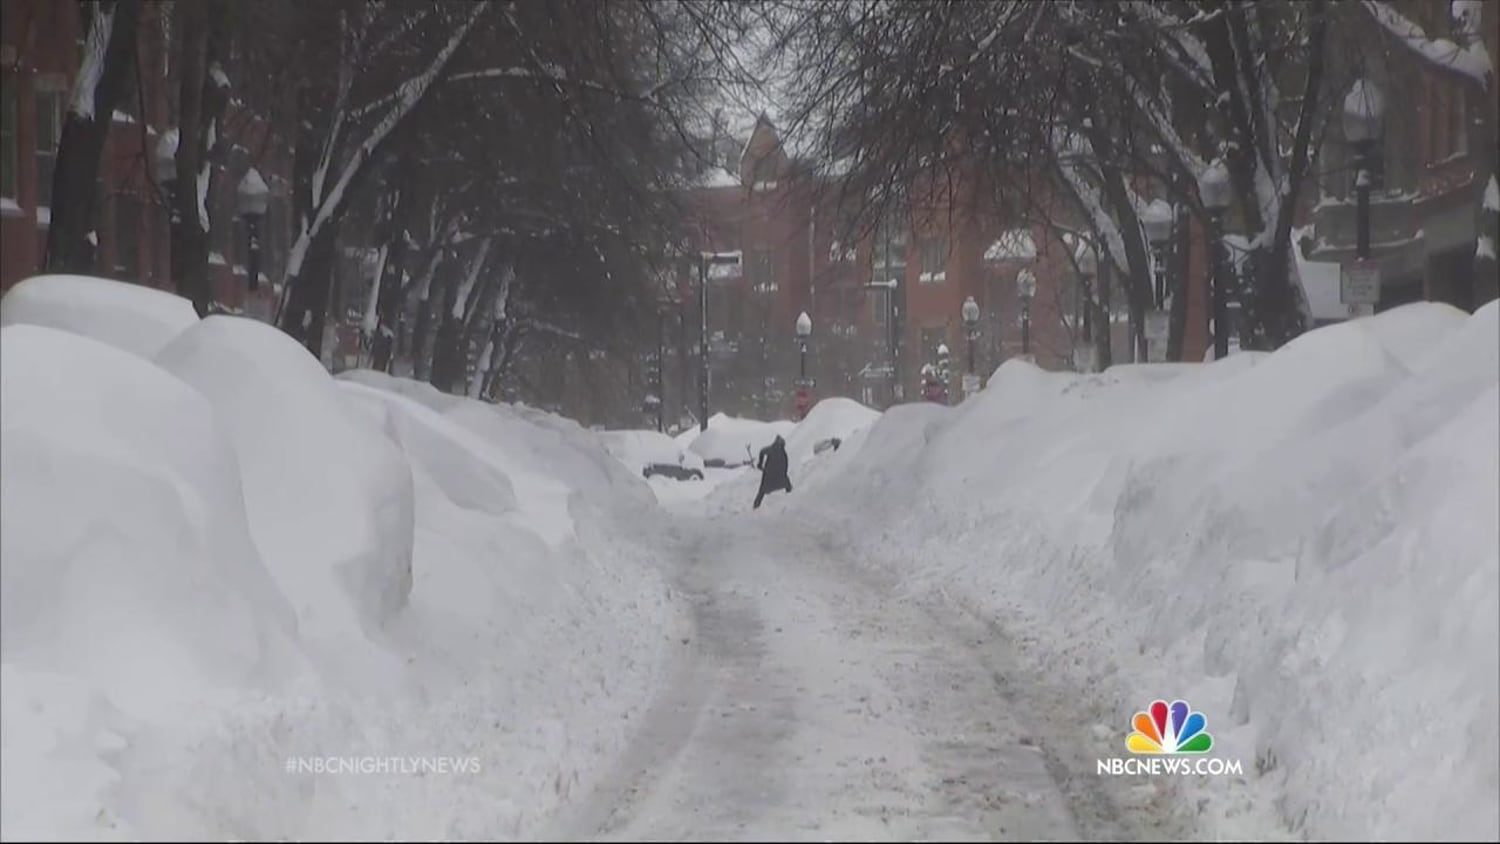 Snow-verwhelmed: Already Buried, Boston Braces for Yet Another